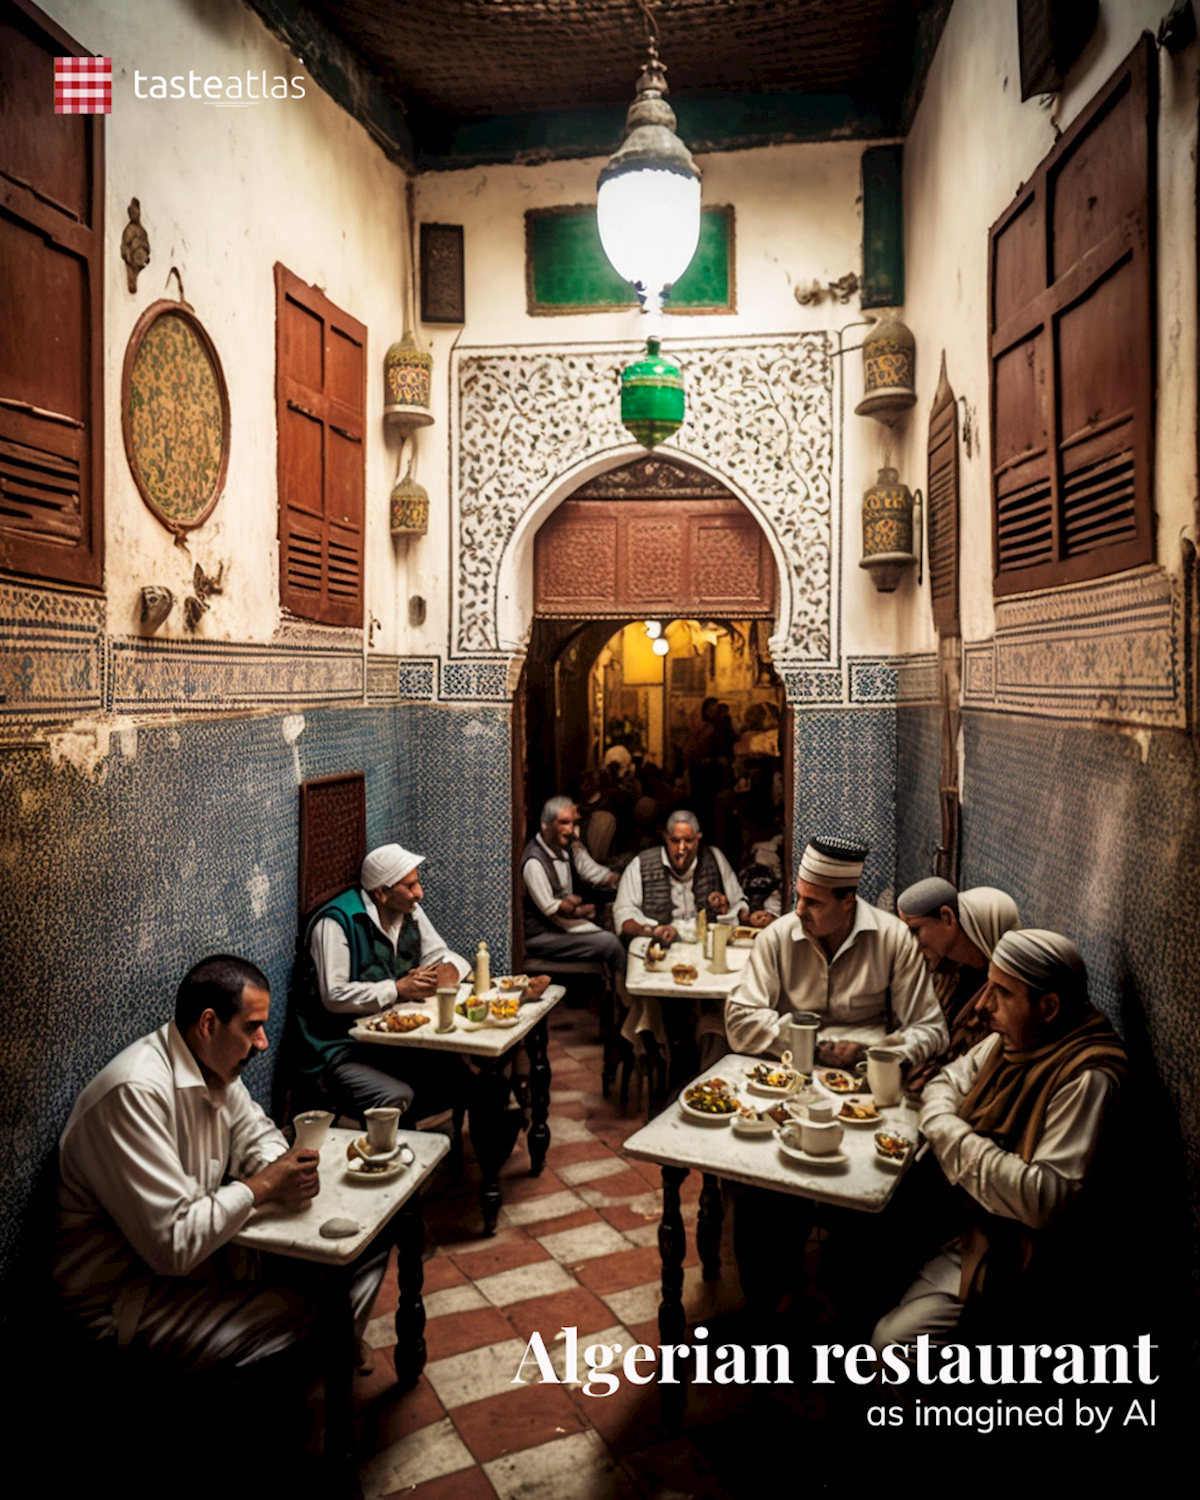 Prompt: Imagine locals eating in a traditional Algerian restaurant